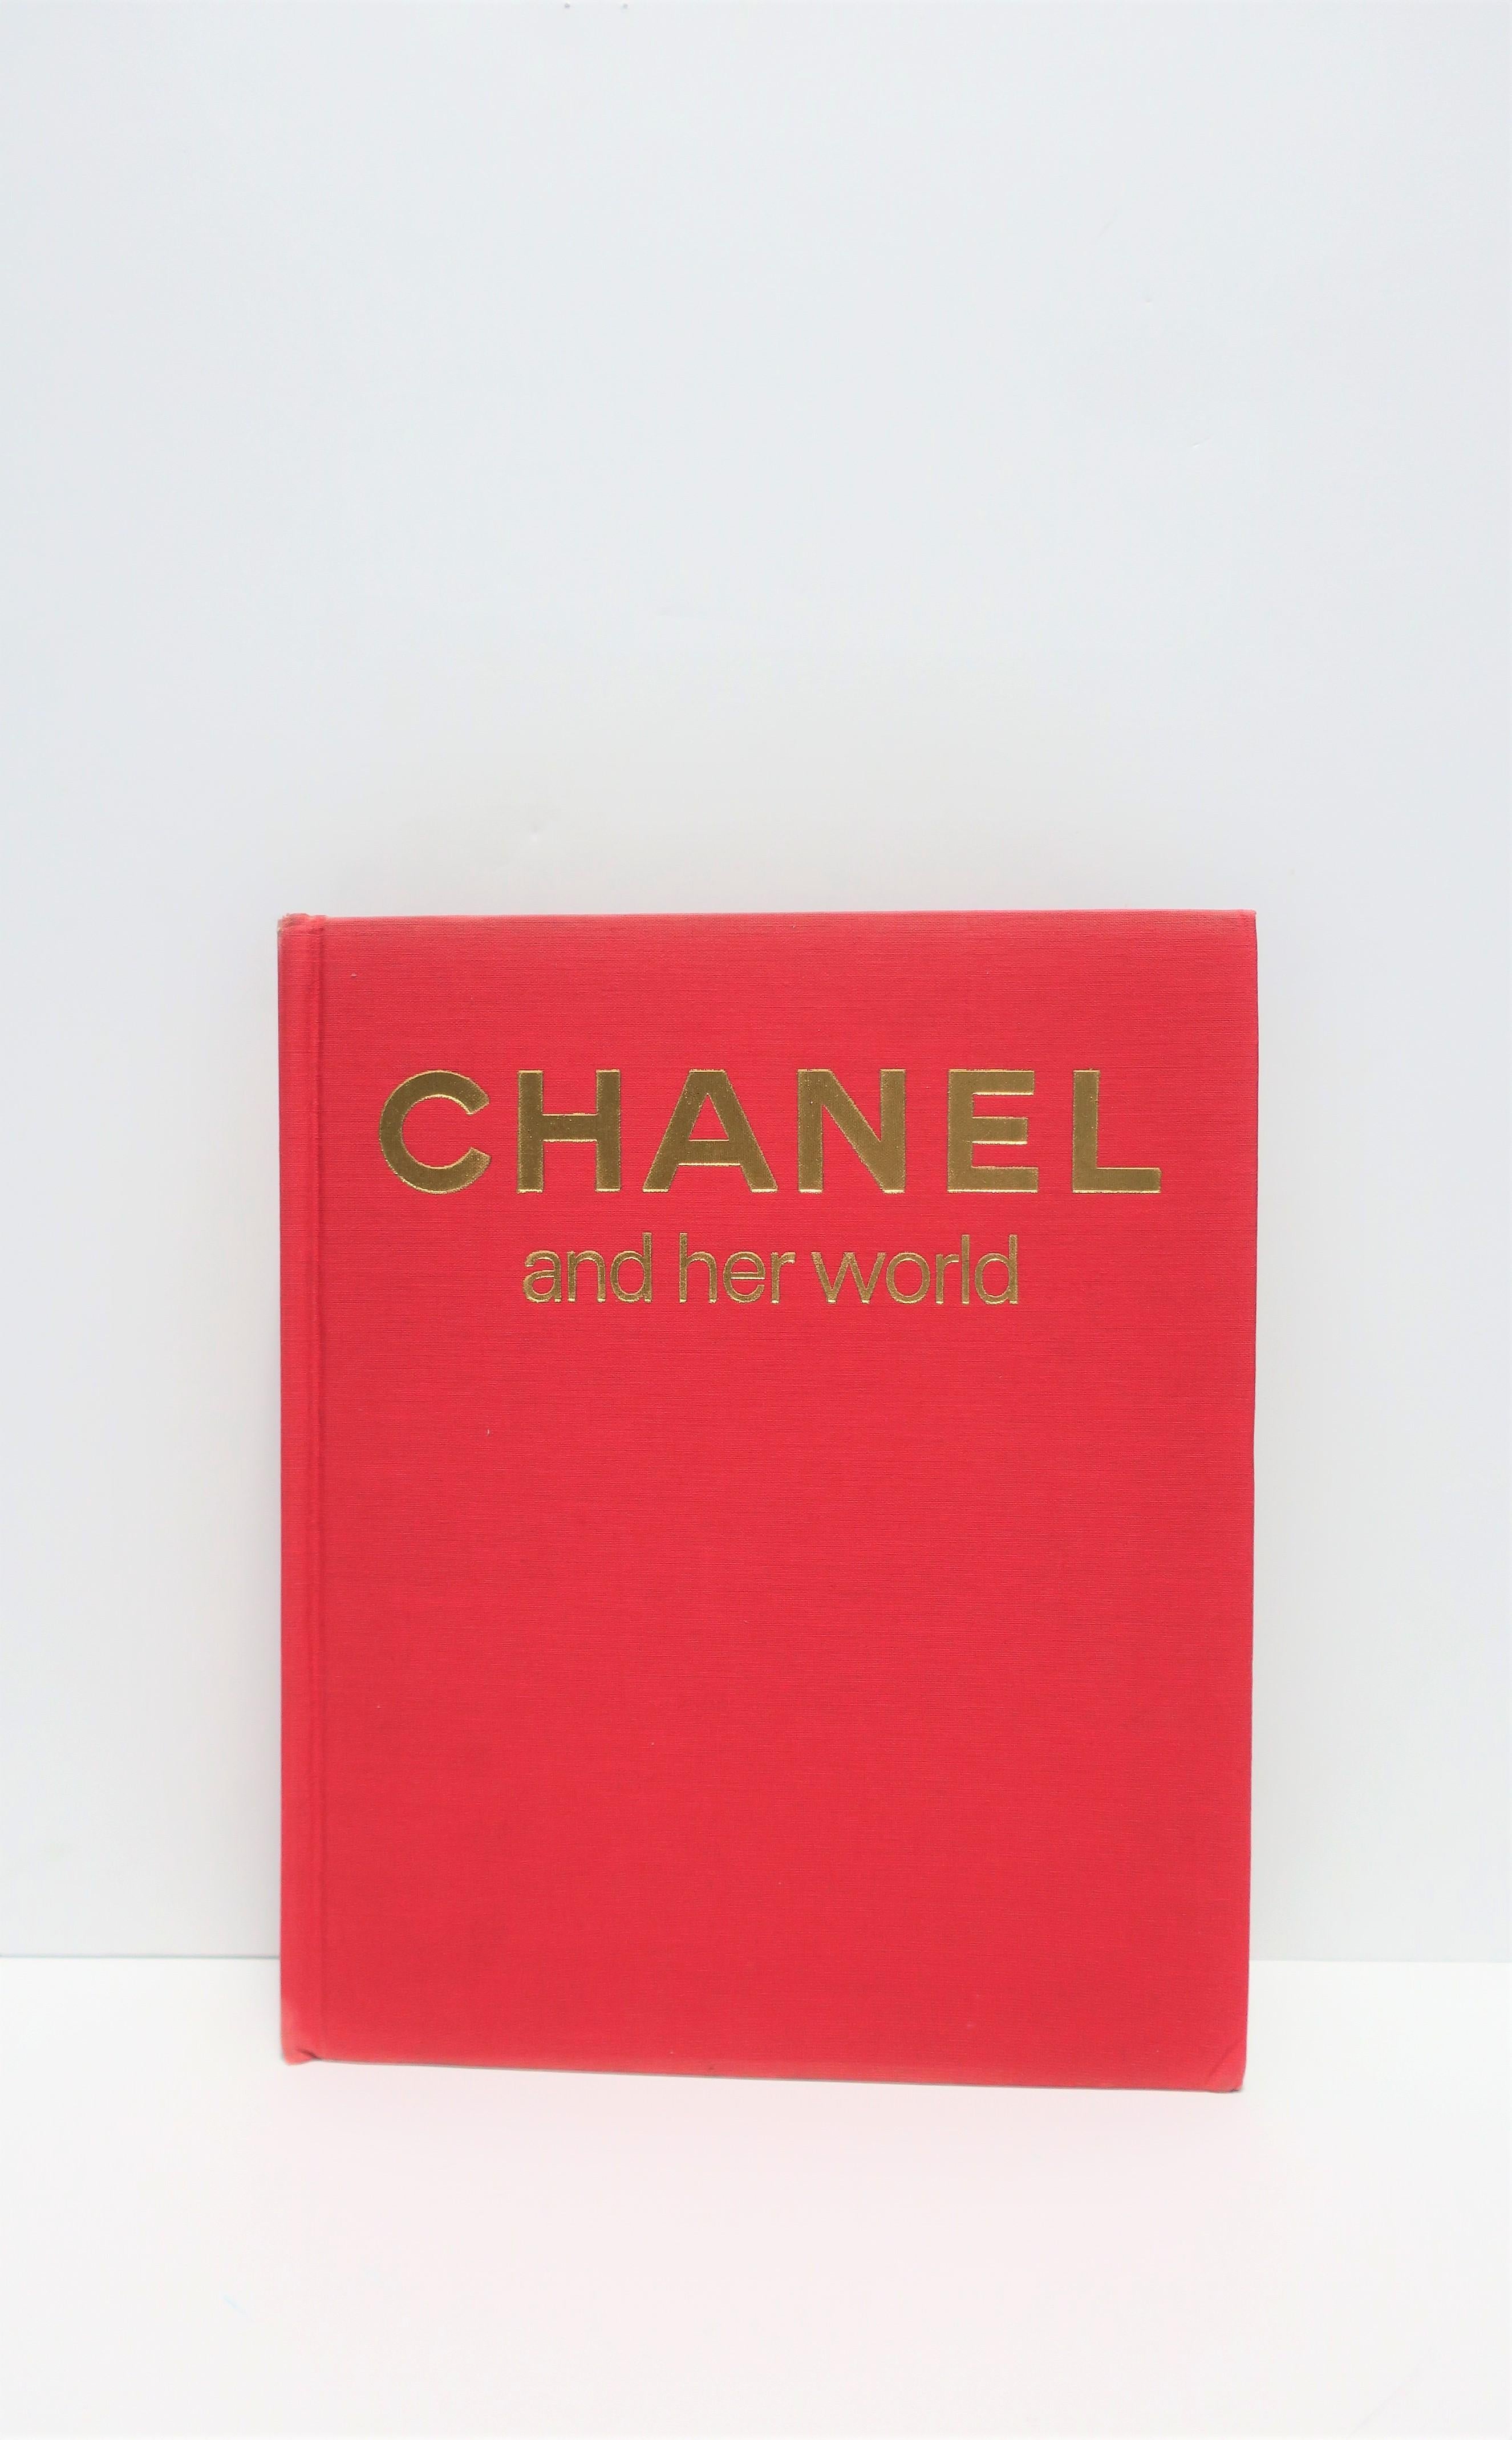 Chanel and her world, by Edmonde Charles-Roux, circa 1979.
This is an amazing first addition, hardcover library or coffee table book about the life and career of early 20th century icon, Gabrielle 